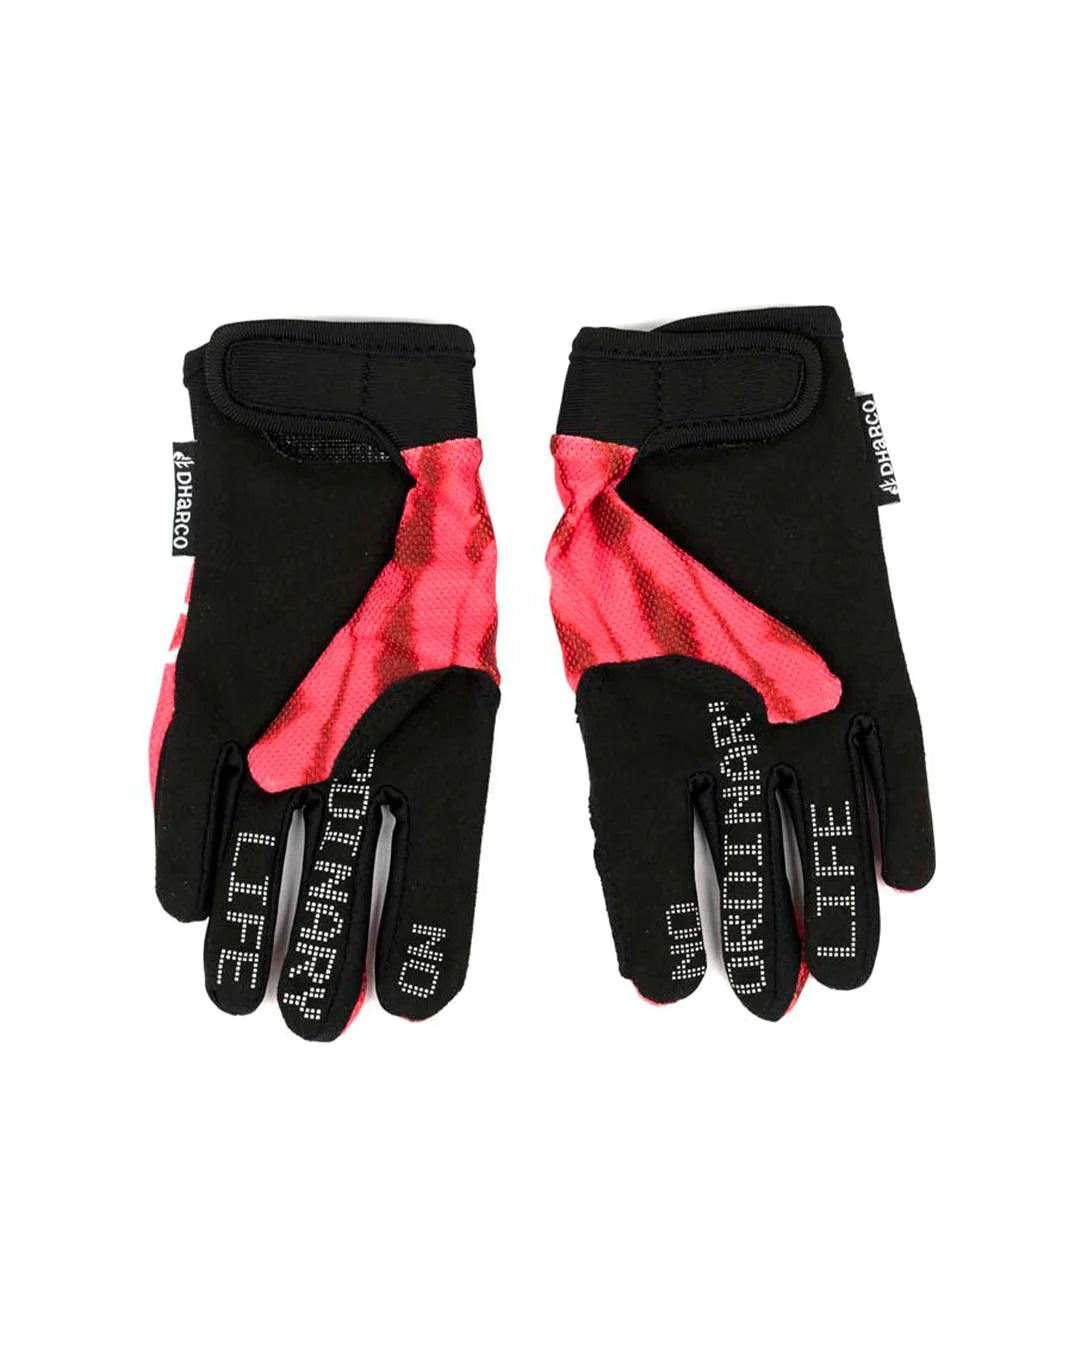 DHaRCO YOUTH GLOVES | VAL DI SOLE